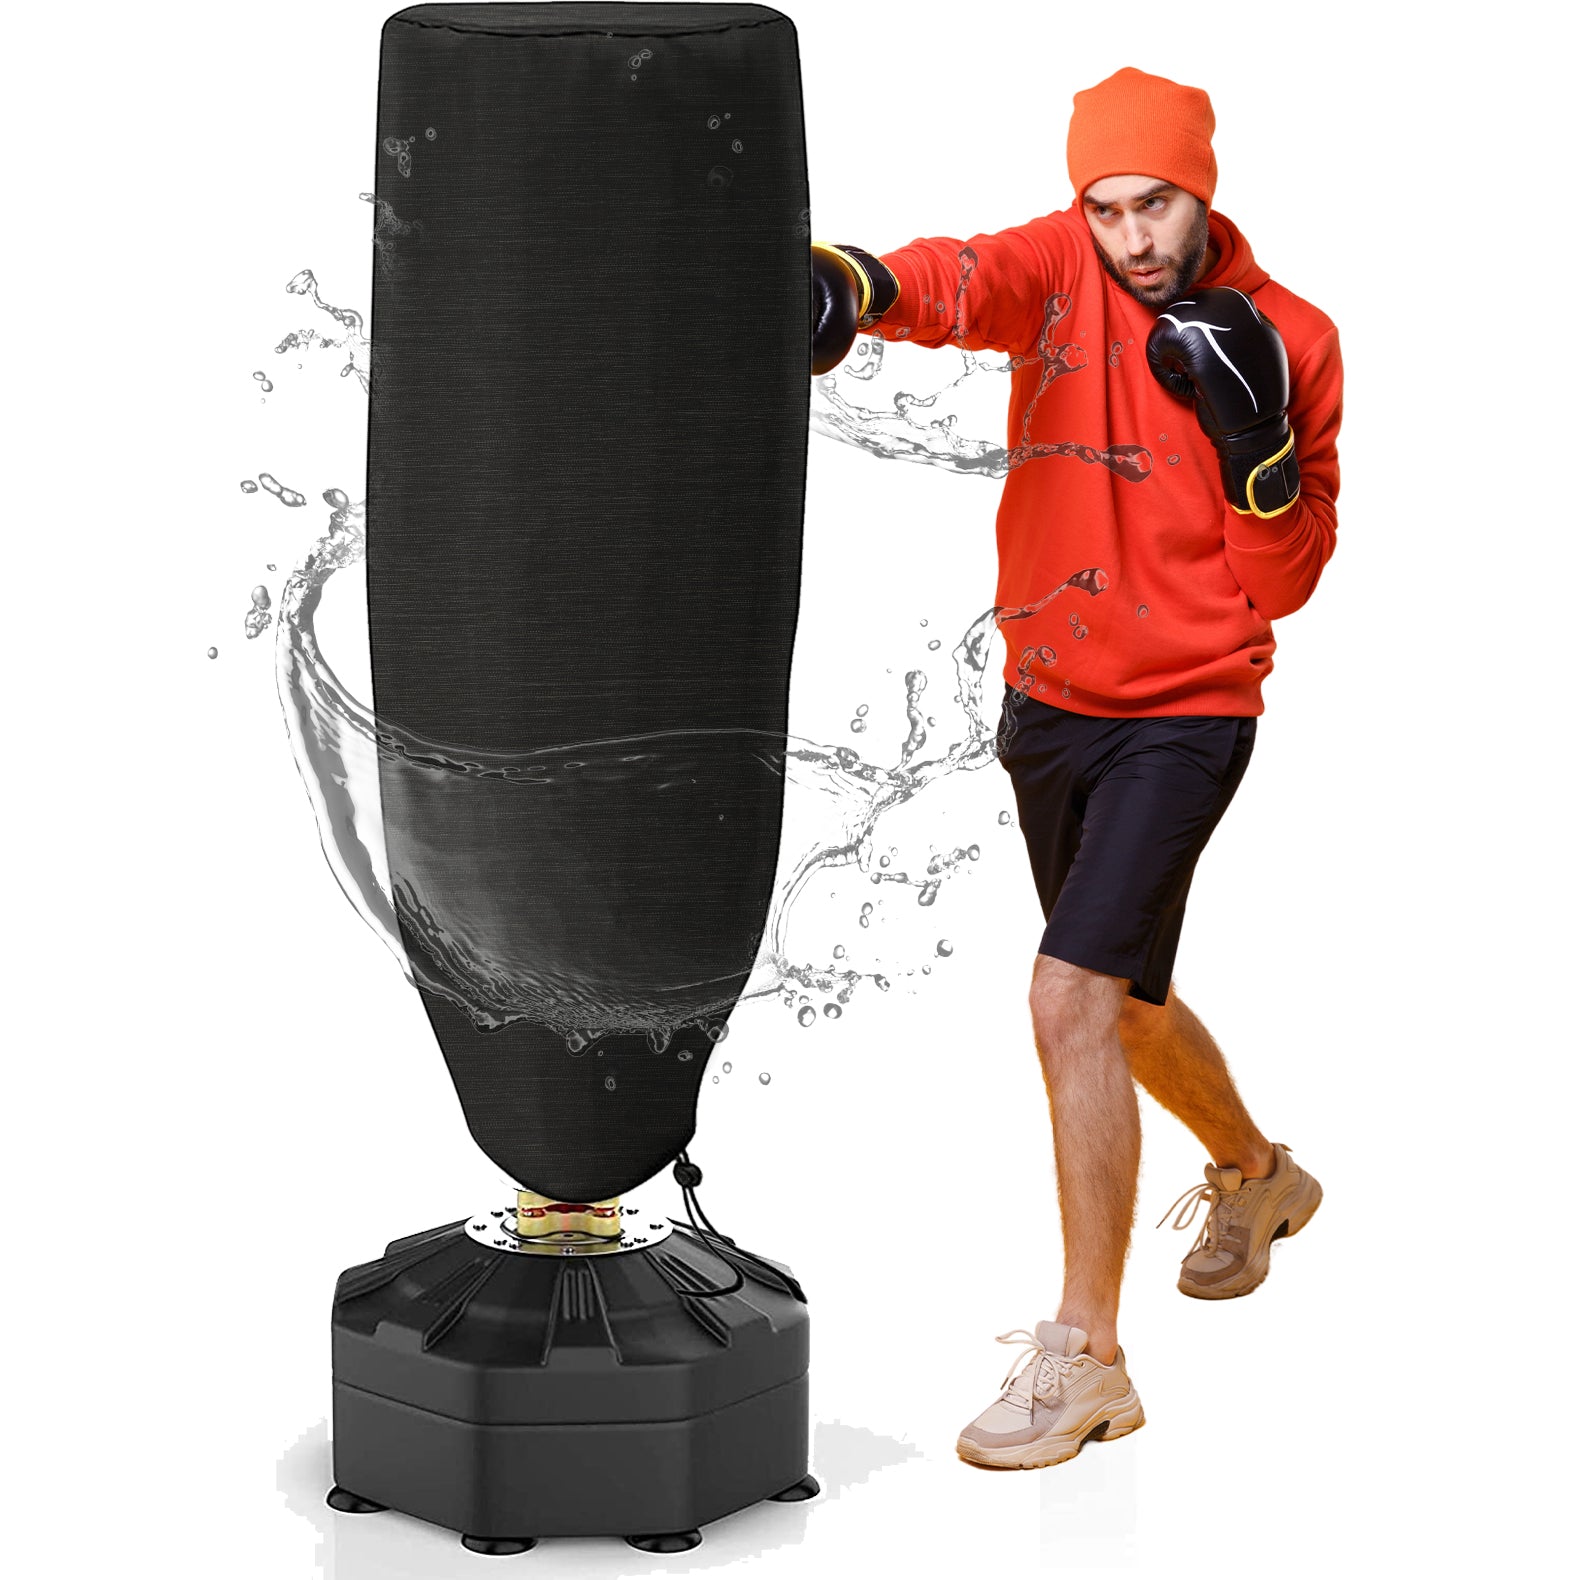 Punch Bag Cover For Outdoors - Weatherproof Rain, Snow, UV Protector For Standing & Hanging Punch Bags